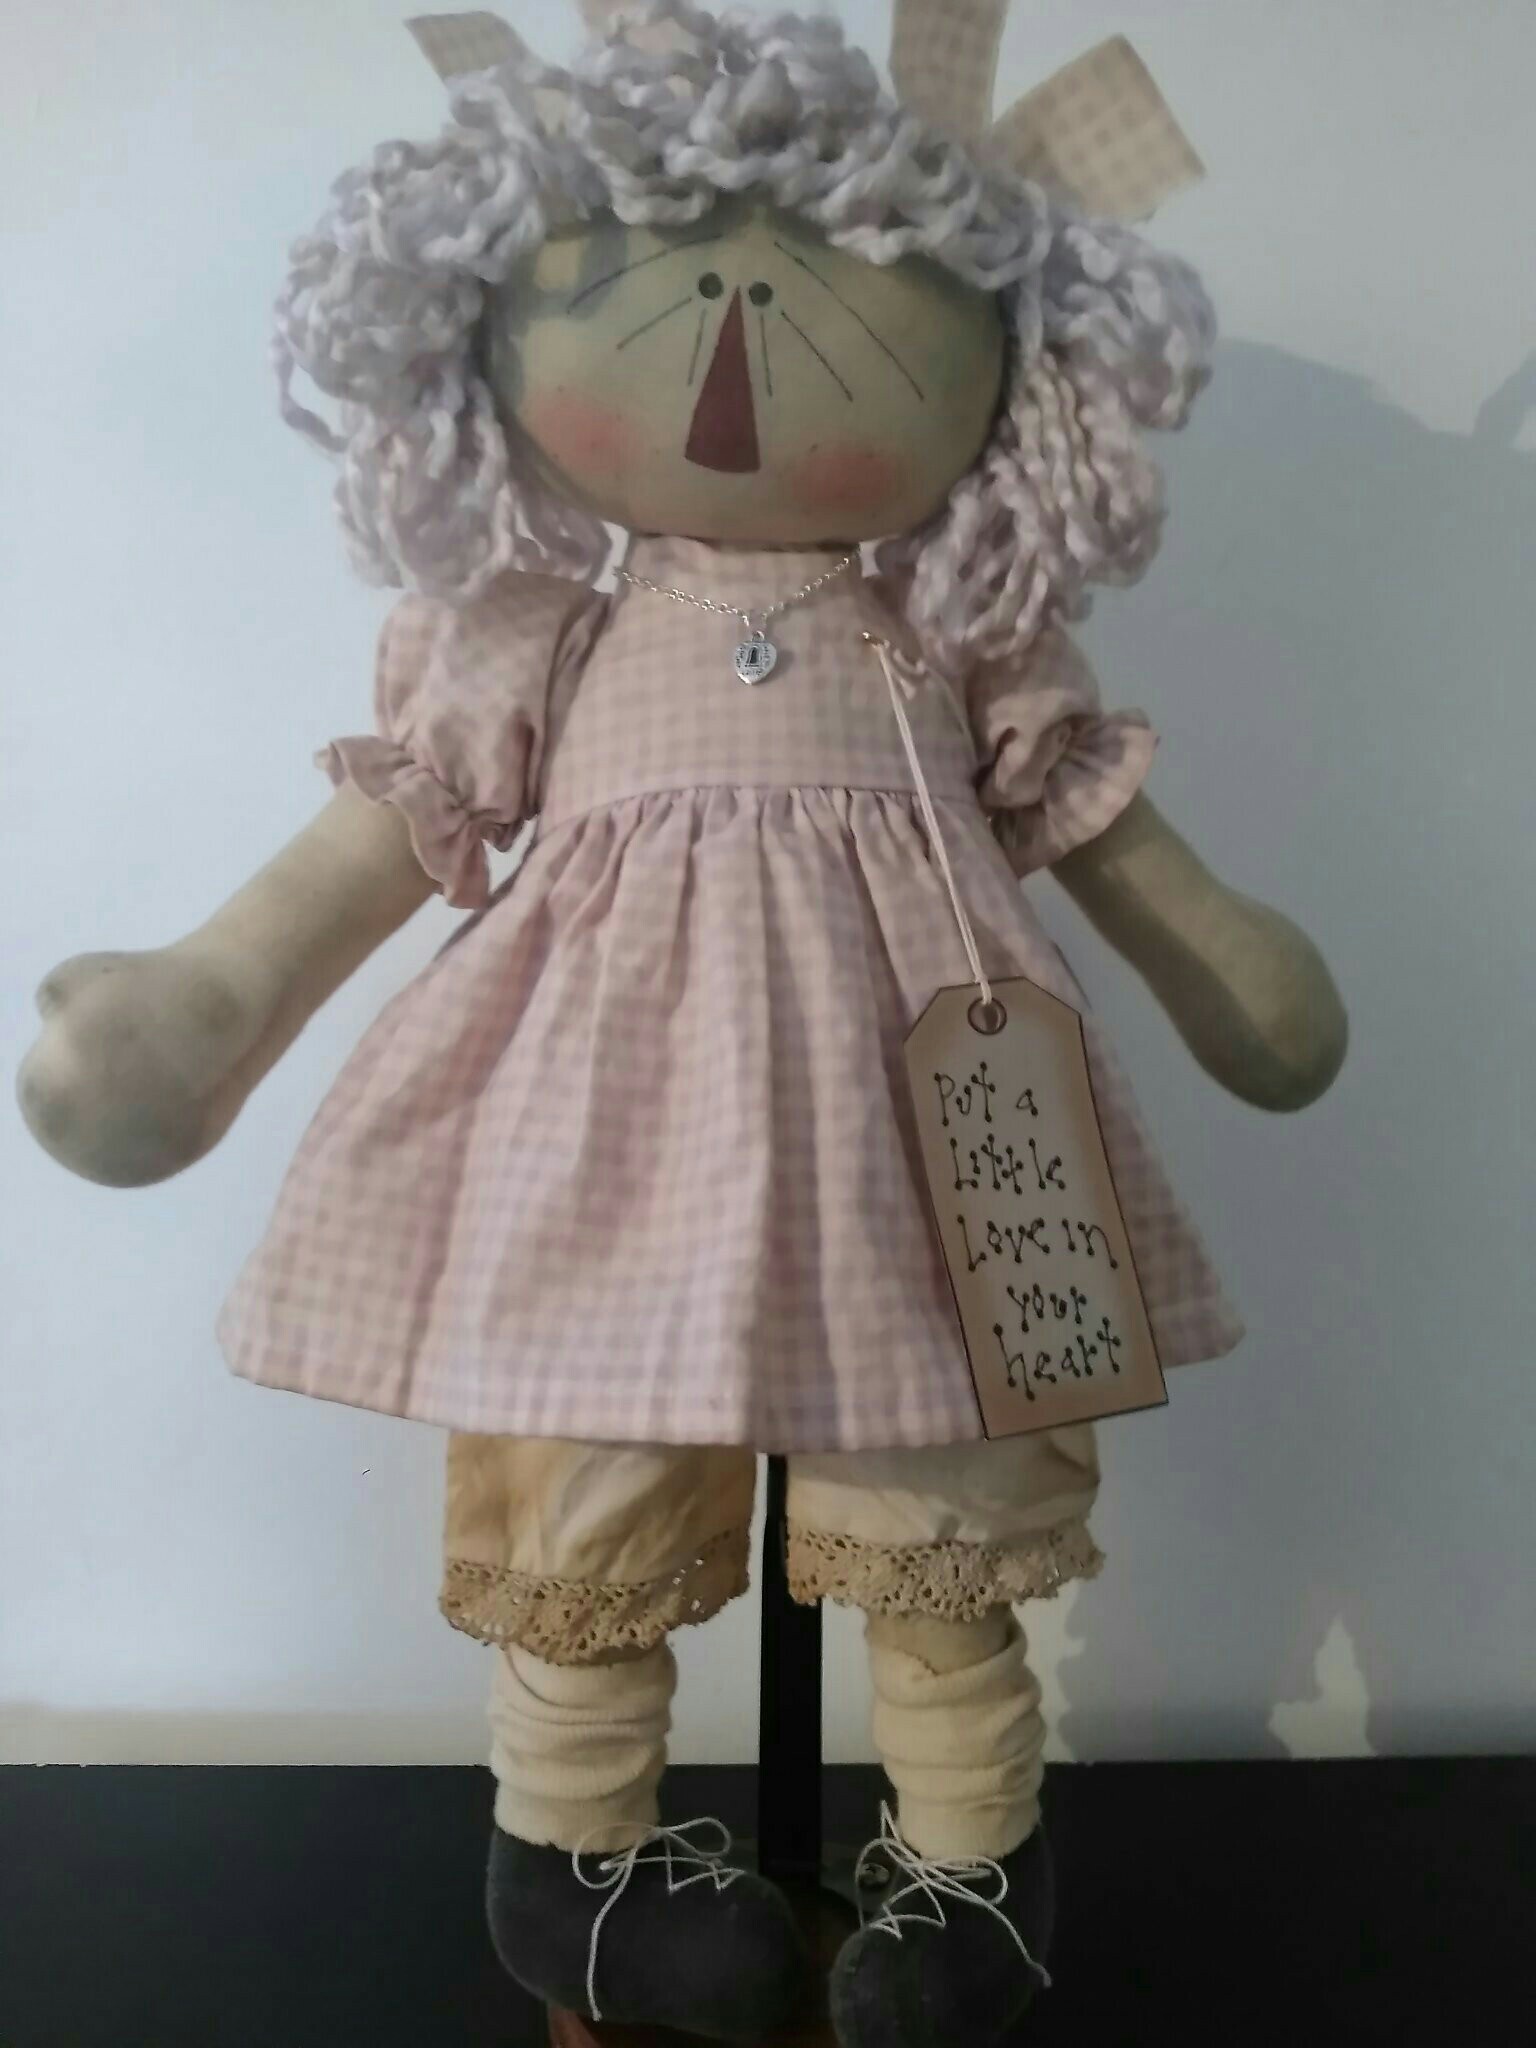 Put a Little Love in Your Heart-handmade, hand crafted, primitive, country, rag doll, rag, doll, wholesale, retail, gift, present, friend gift, birthday gift, original, design, original design, St Jude, Childrens, Research, Hospital,